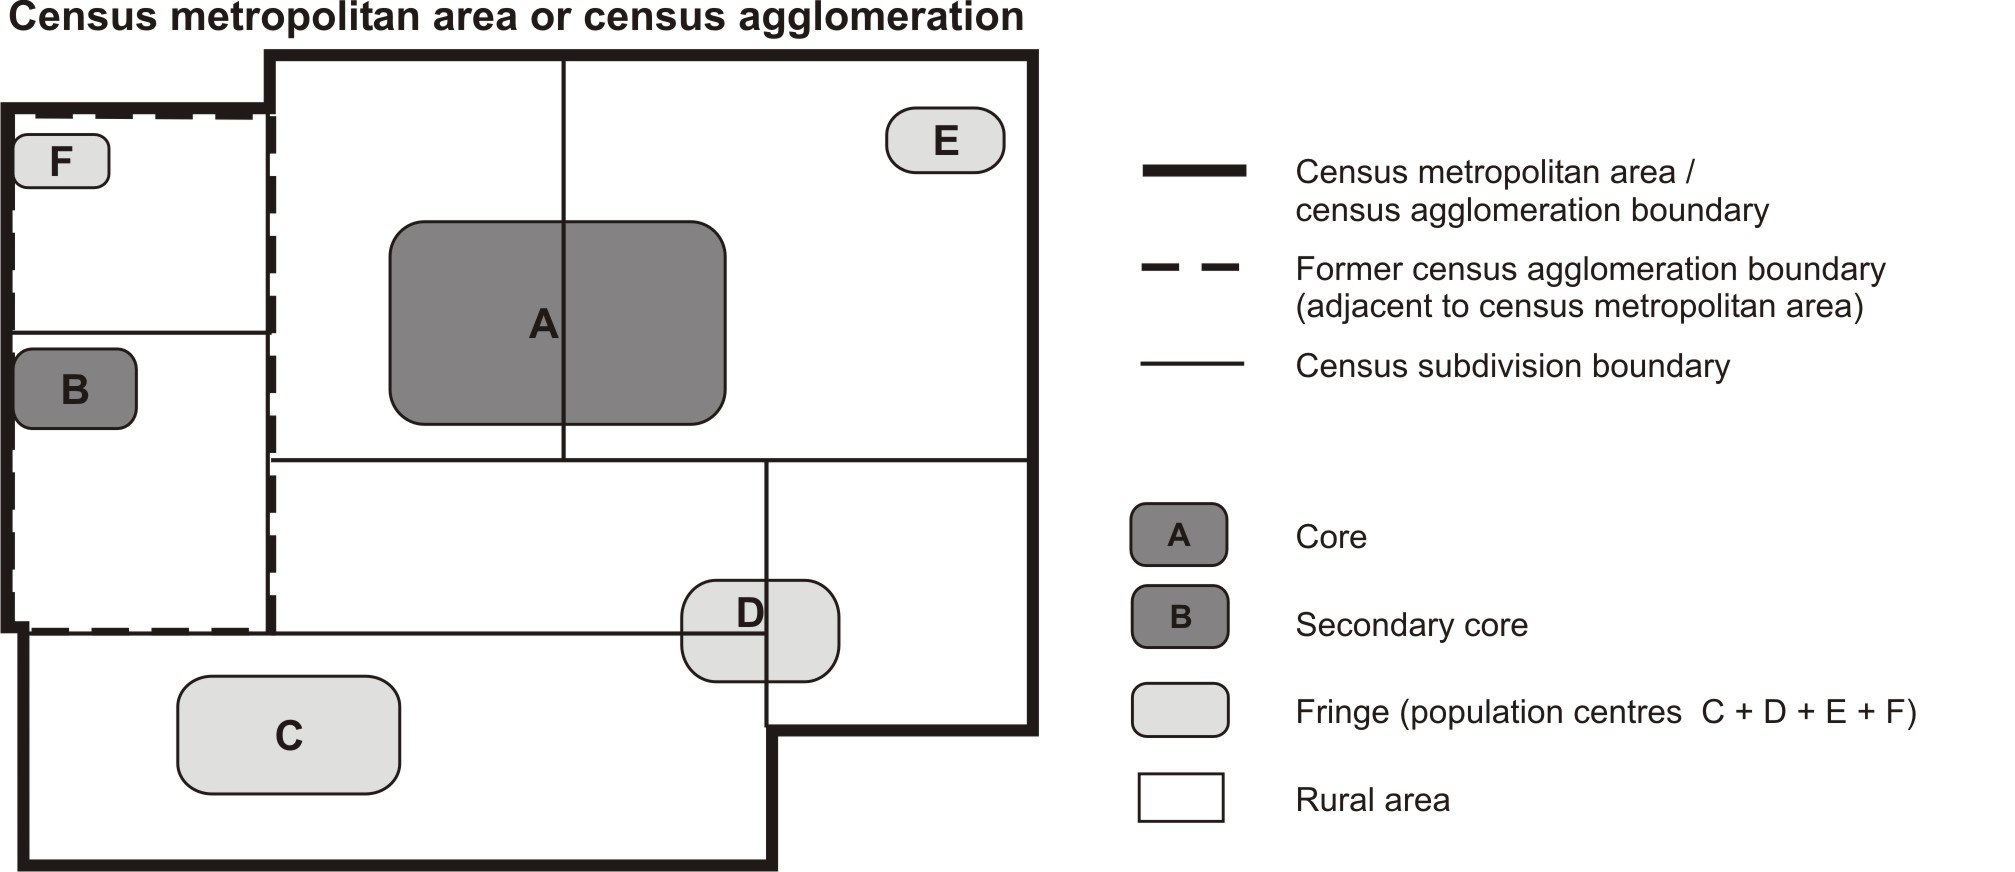 Figure 12 Example of a census metropolitan area or a census agglomeration, showing core, secondary core, fringe and rural area